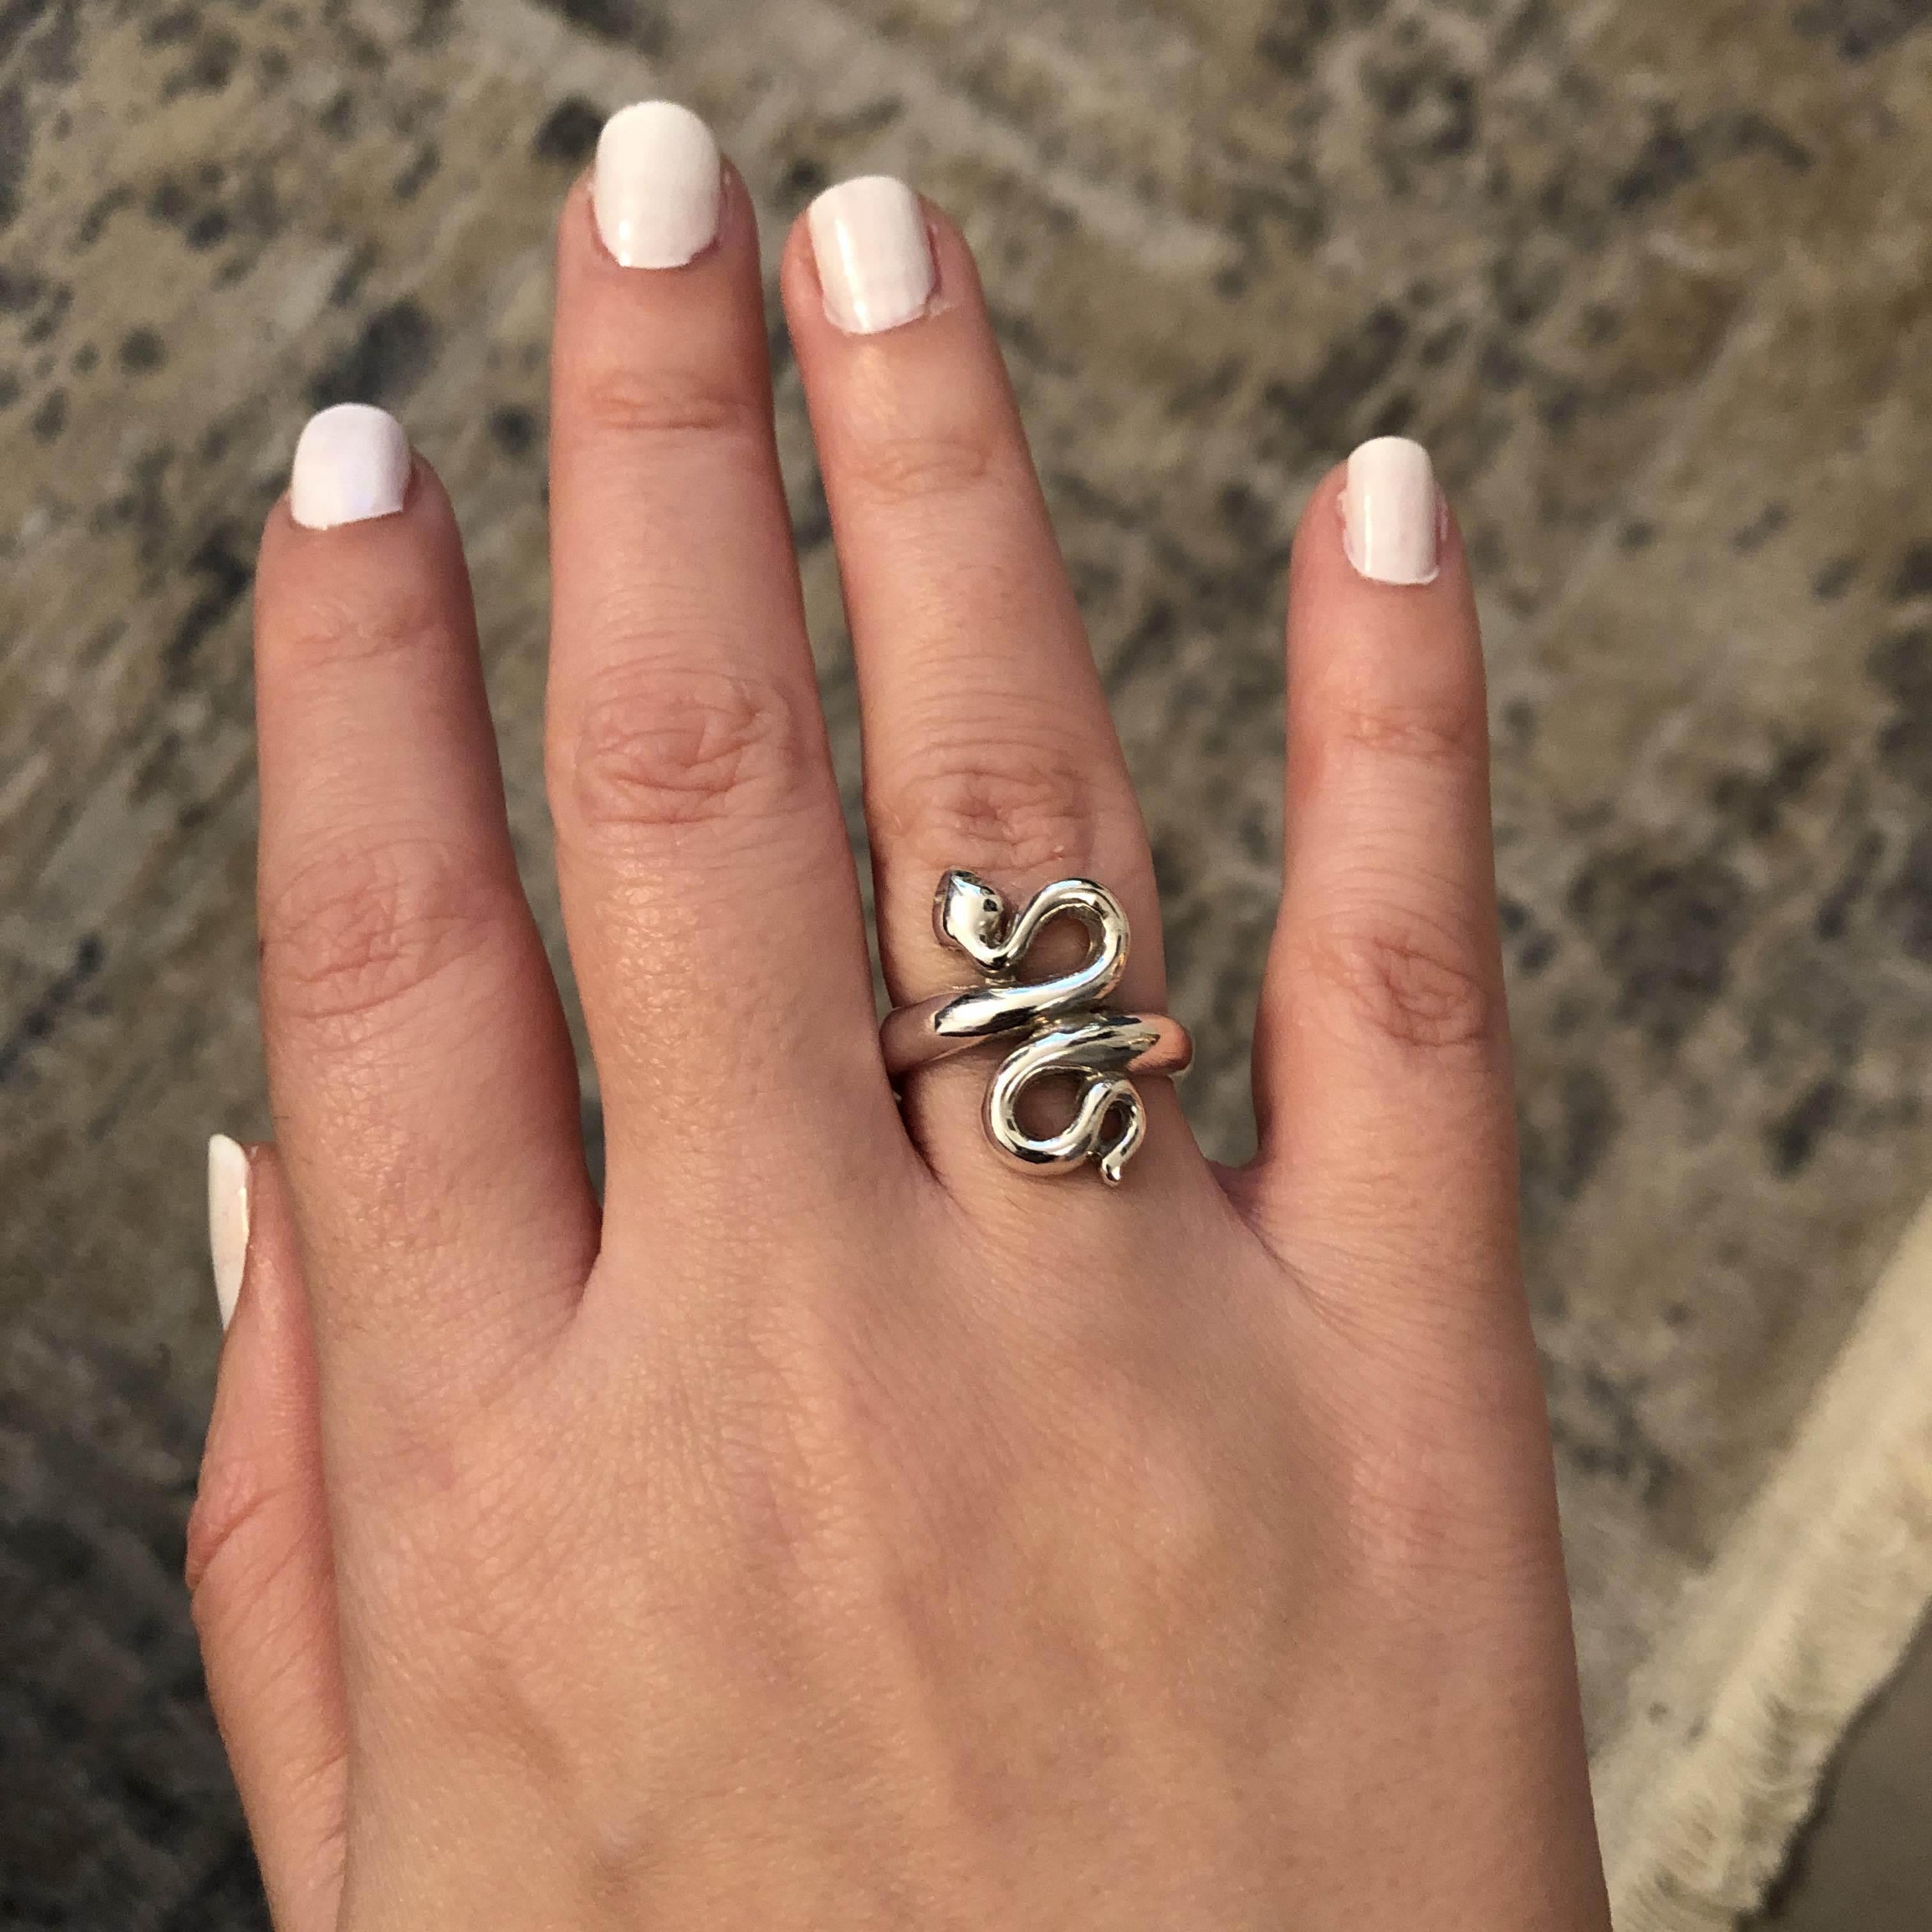 Coiled Snake Ring, Ancient Greek Minoan Ring, Sterling Silver Ring, Handmade Ring, Animal Jewelry, Greek Jewelry - ELEFTHERIOU EL